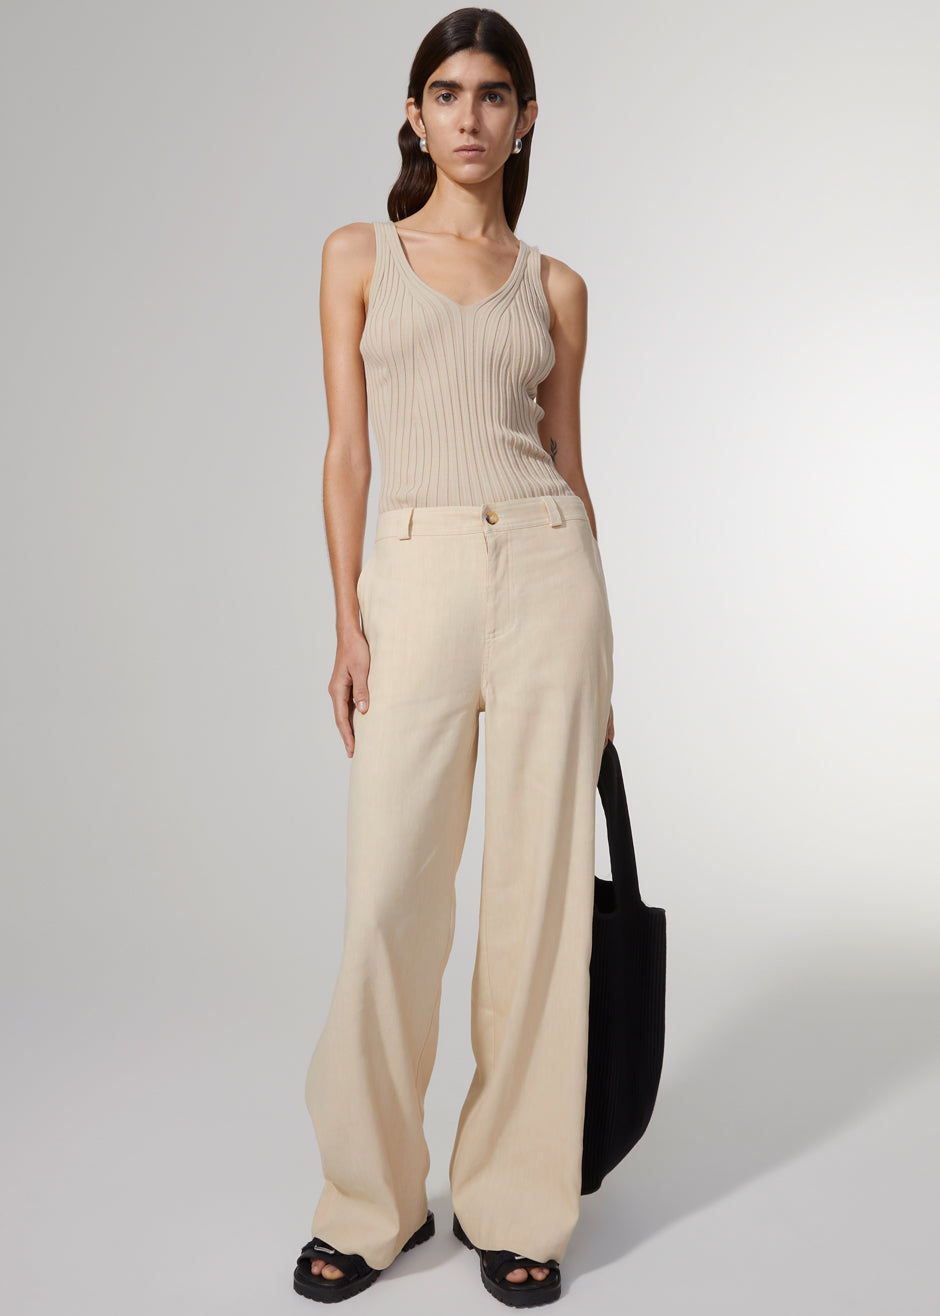 Rodebjer Annie Pants - Warm Sand